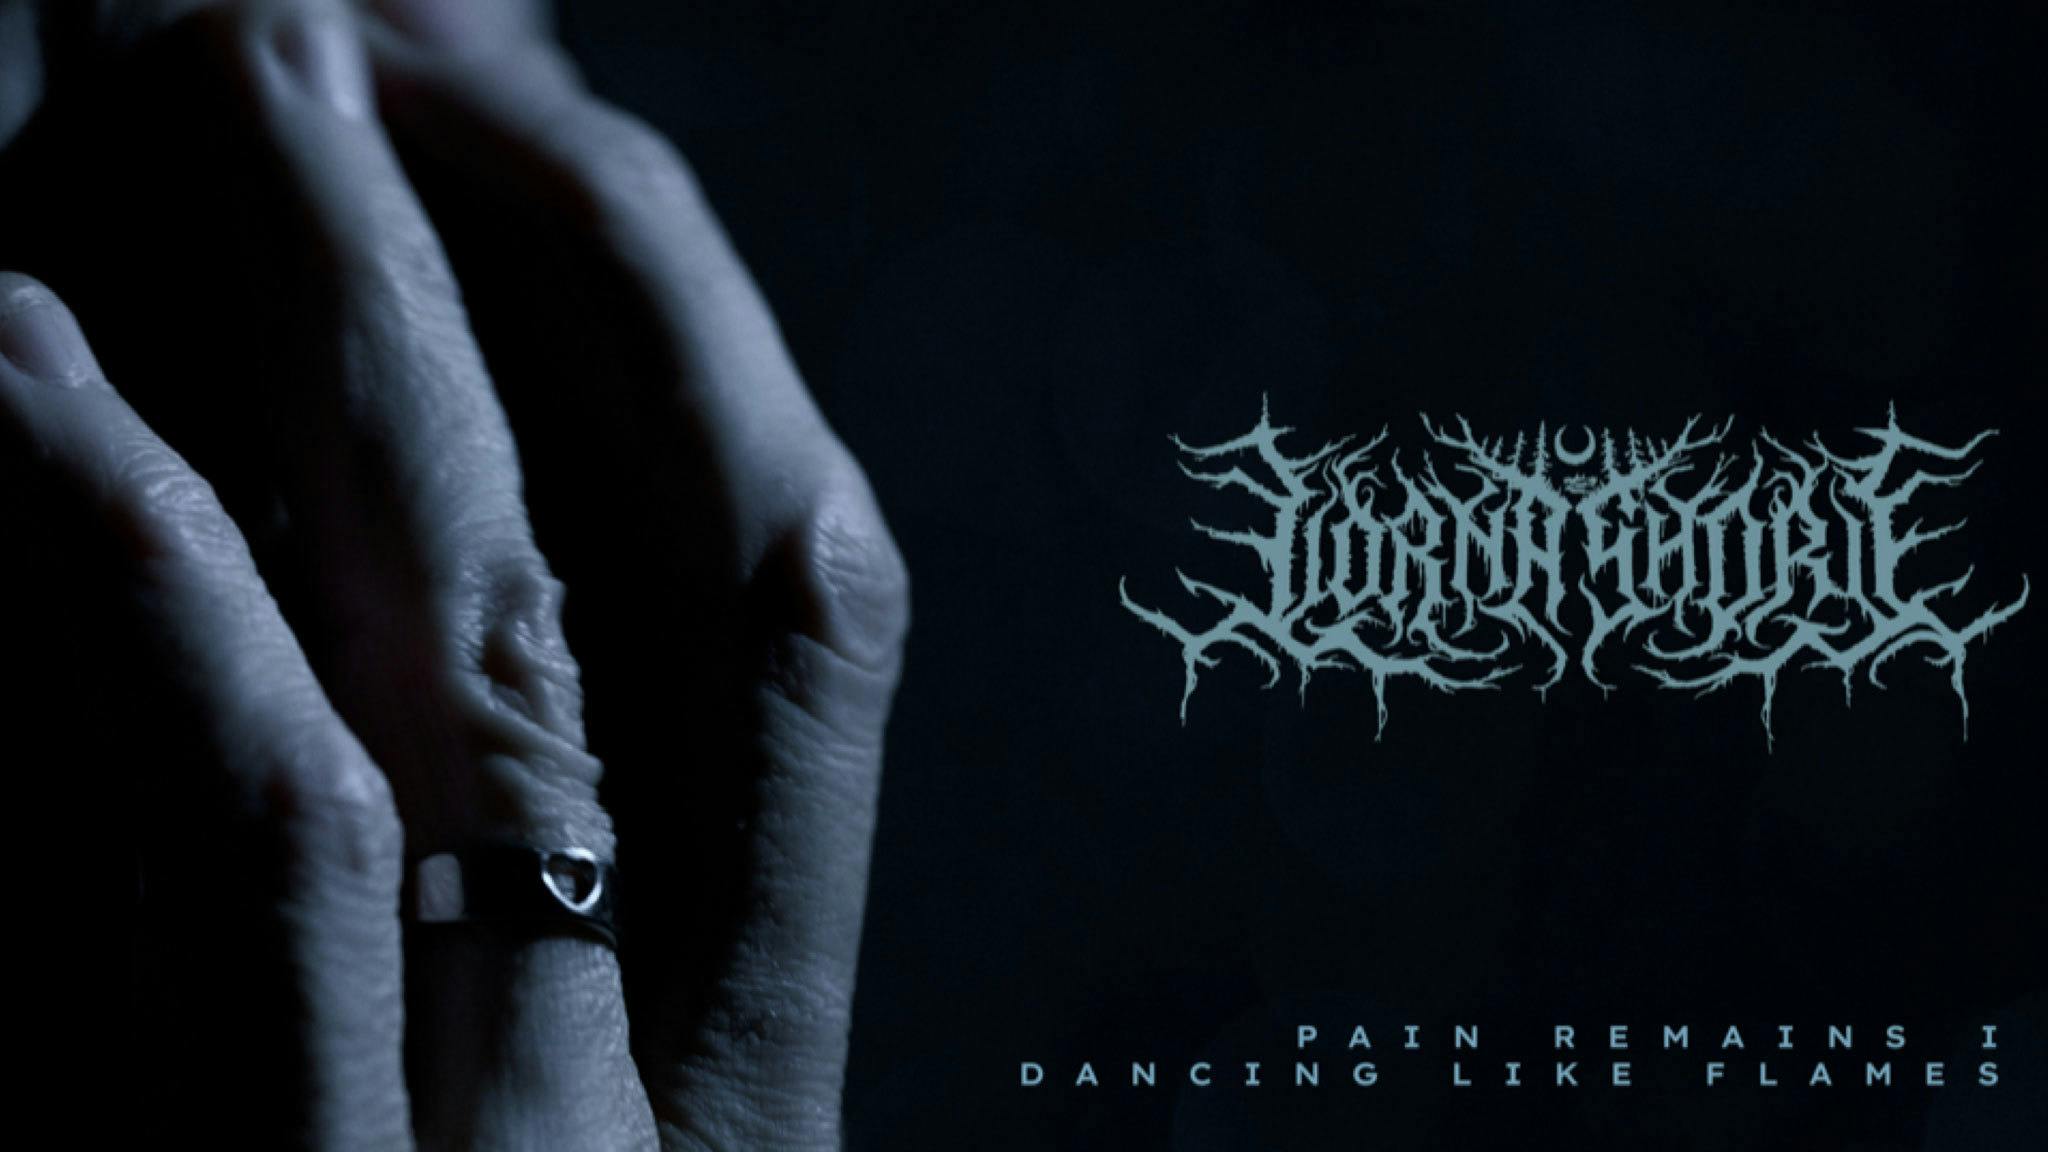 Watch Lorna Shore’s new Pain Remains I: Dancing Like Flames video